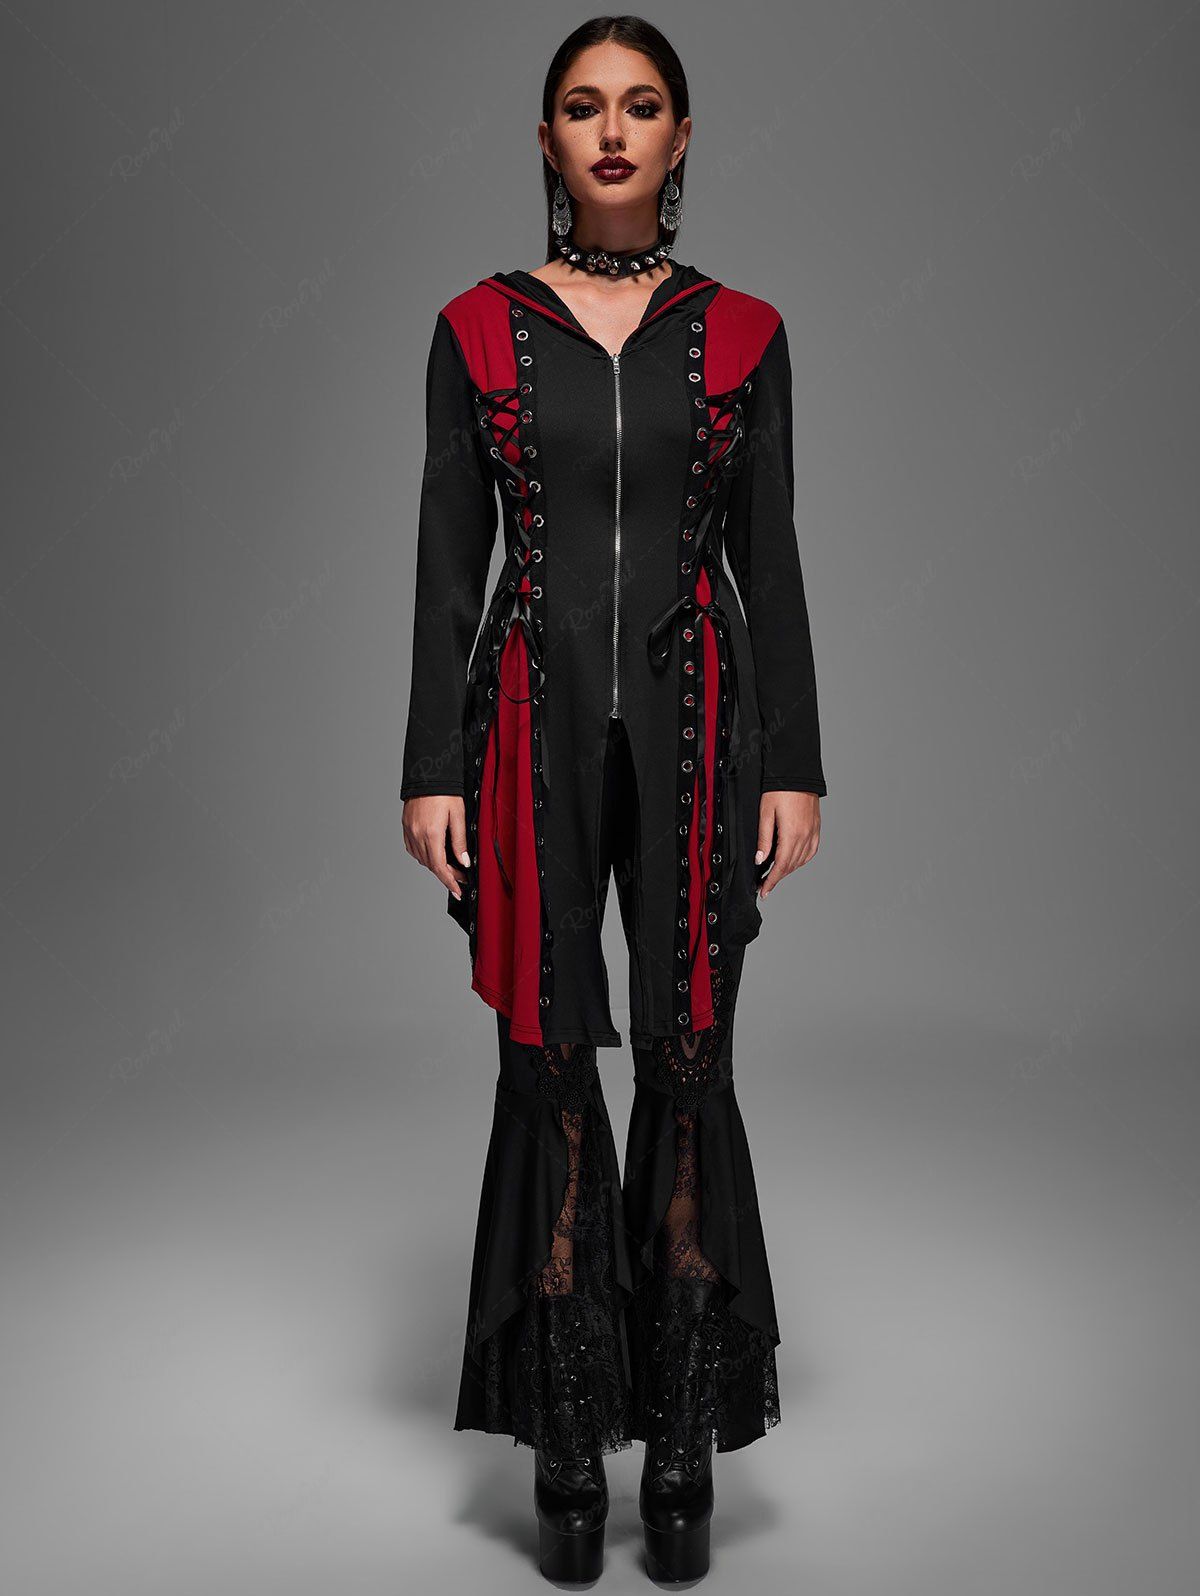 Online Hooded Lace Up Grommets Colorblock Gothic Coat  